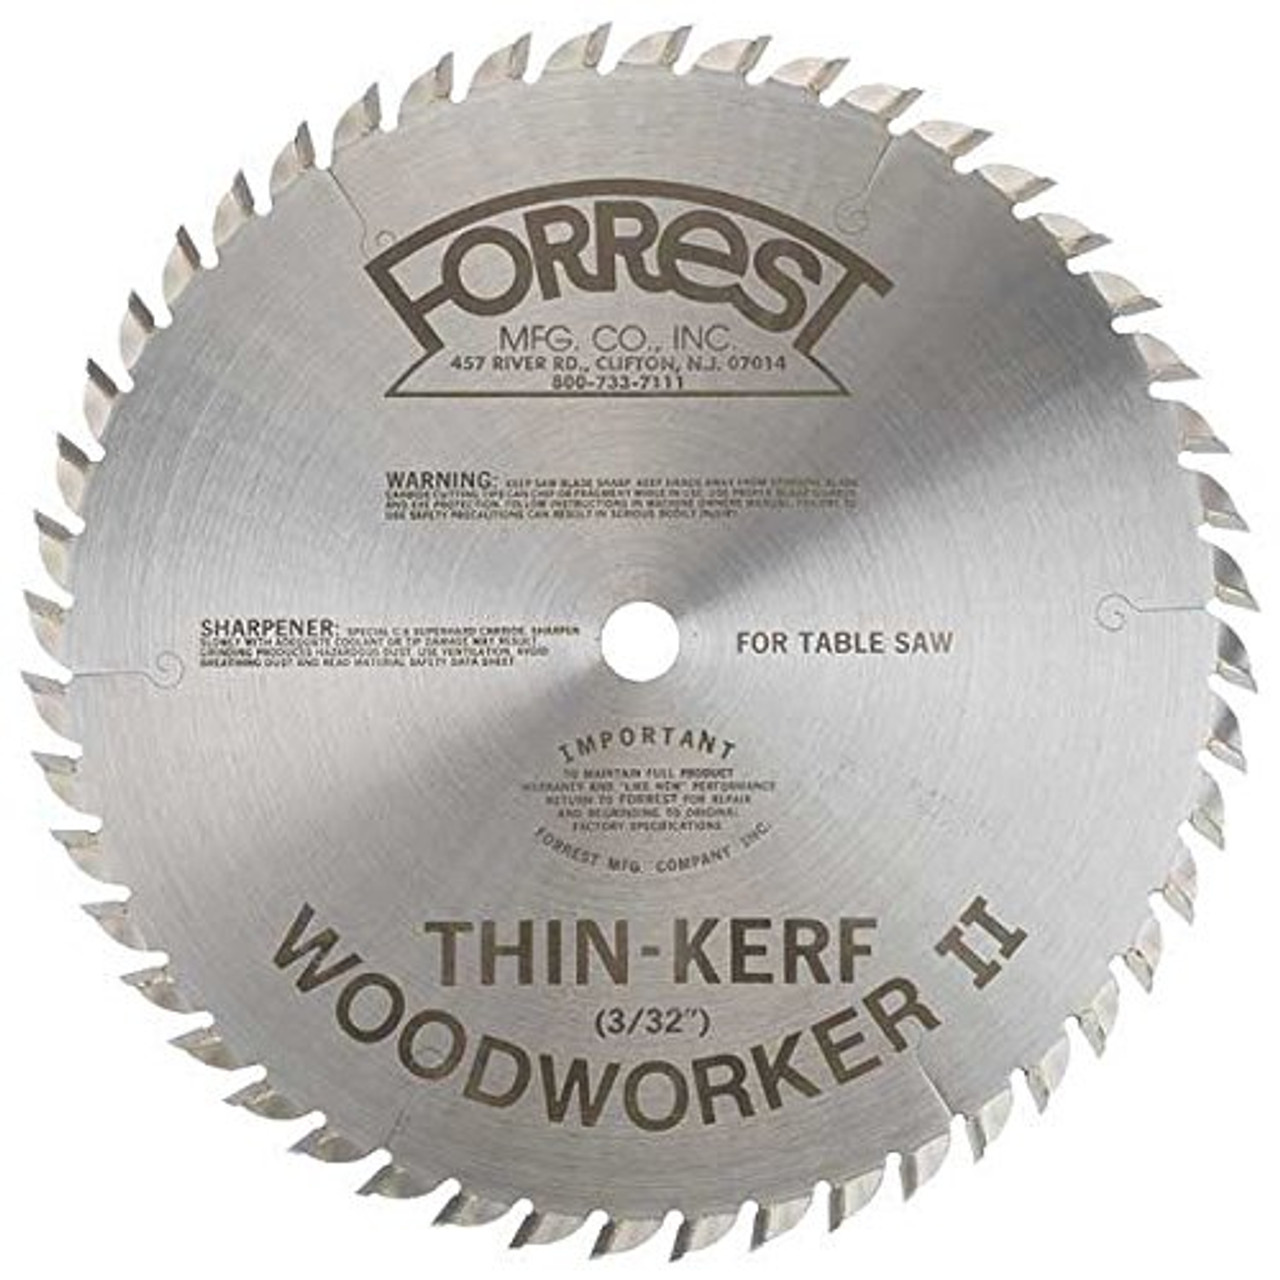 Forrest Woodworker II 10" 48 Tooth Thin Kerf Woodworking Table Saw blade